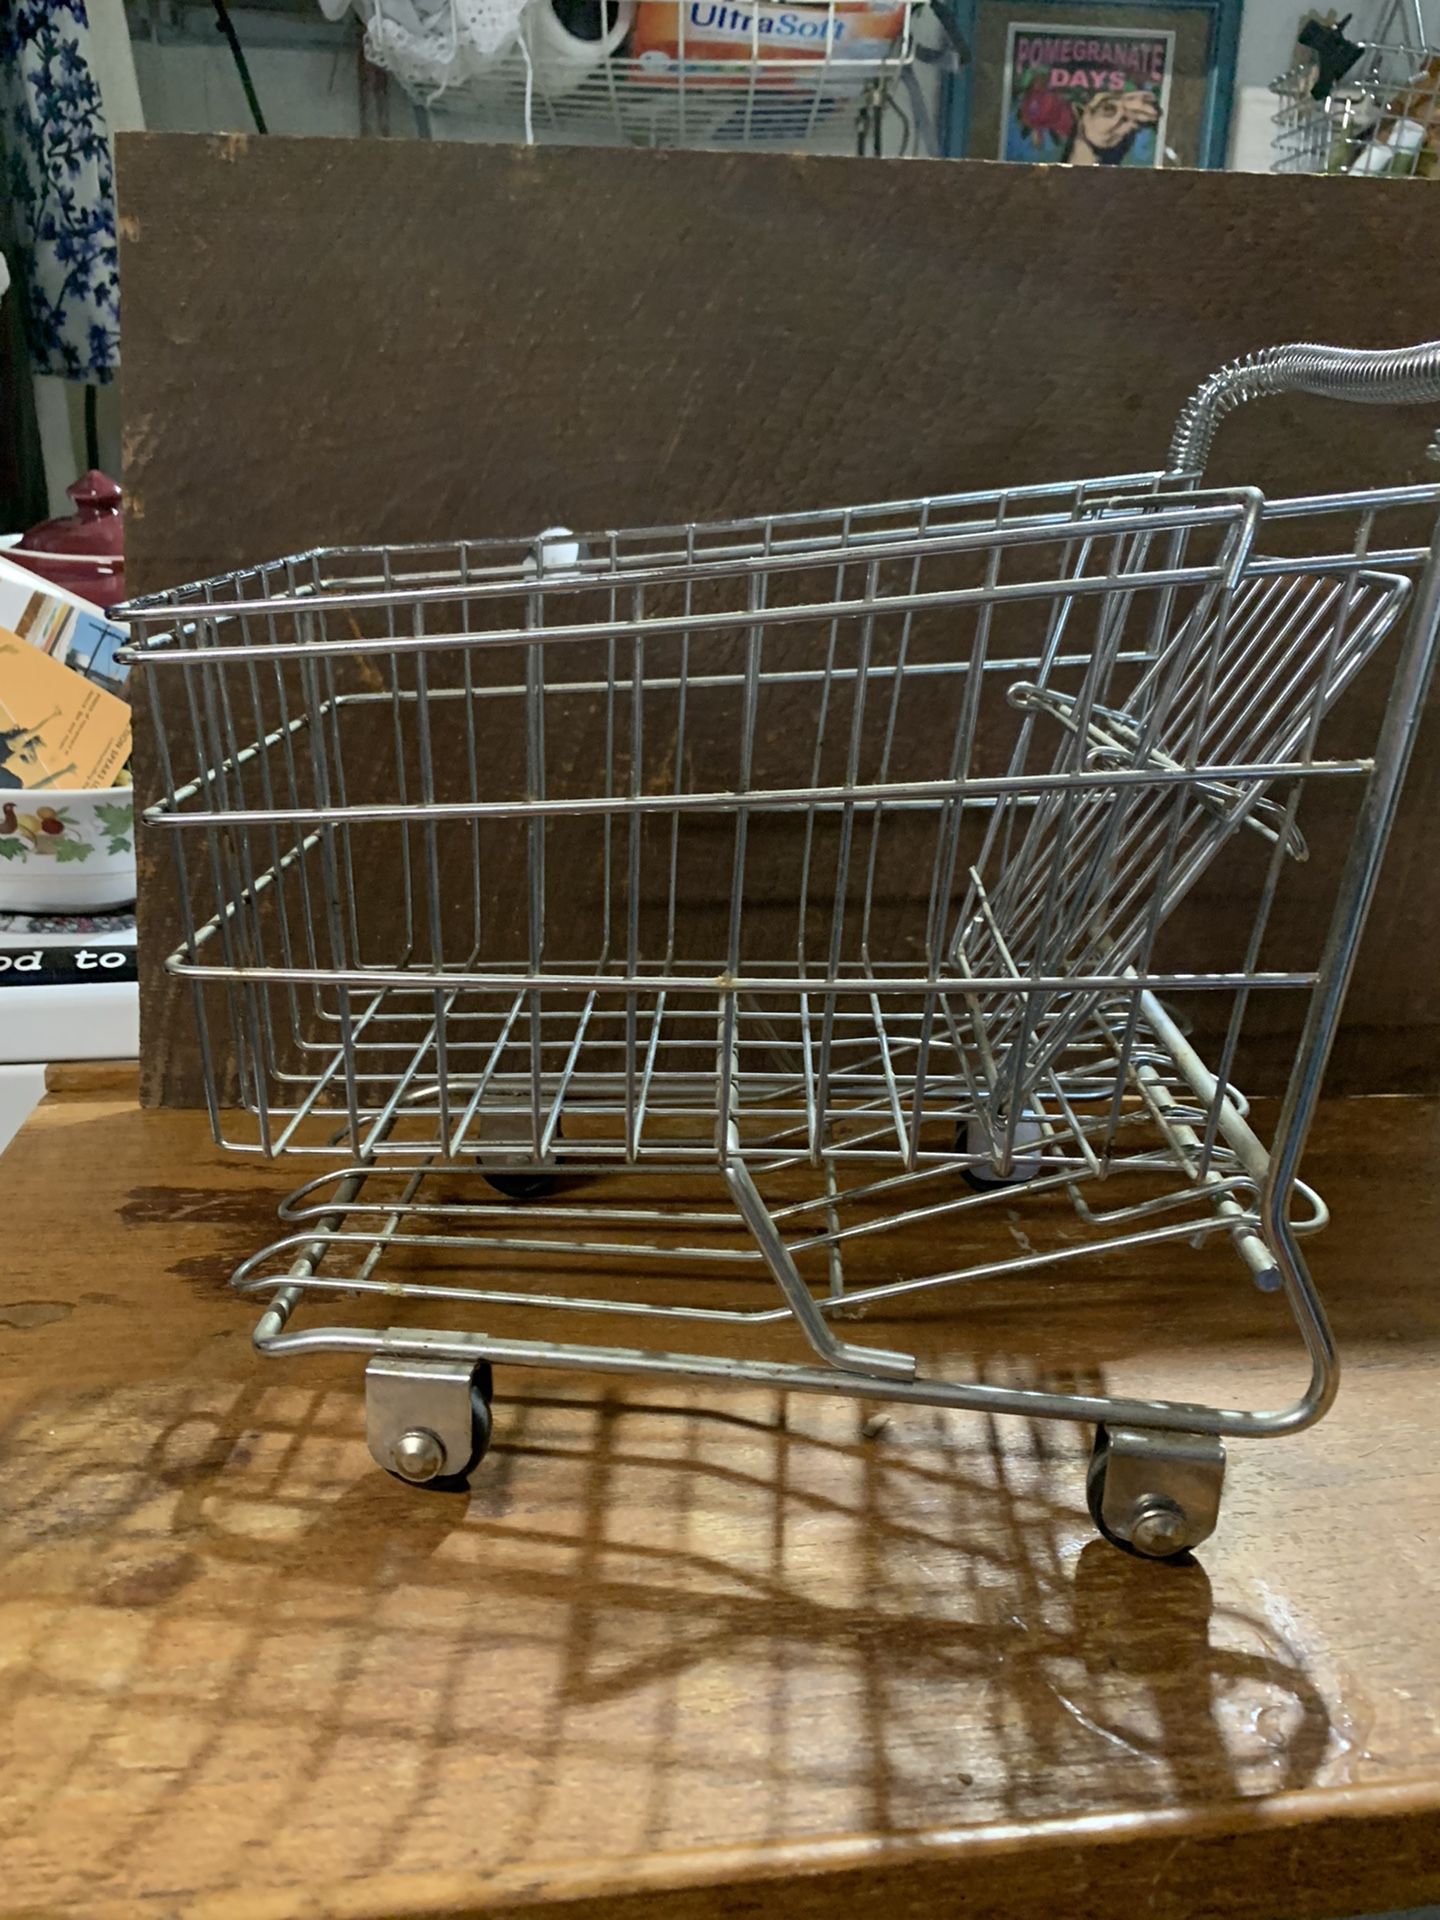 Tiny Shopping Cart, Great For A Display Or A Plant Or A Toy